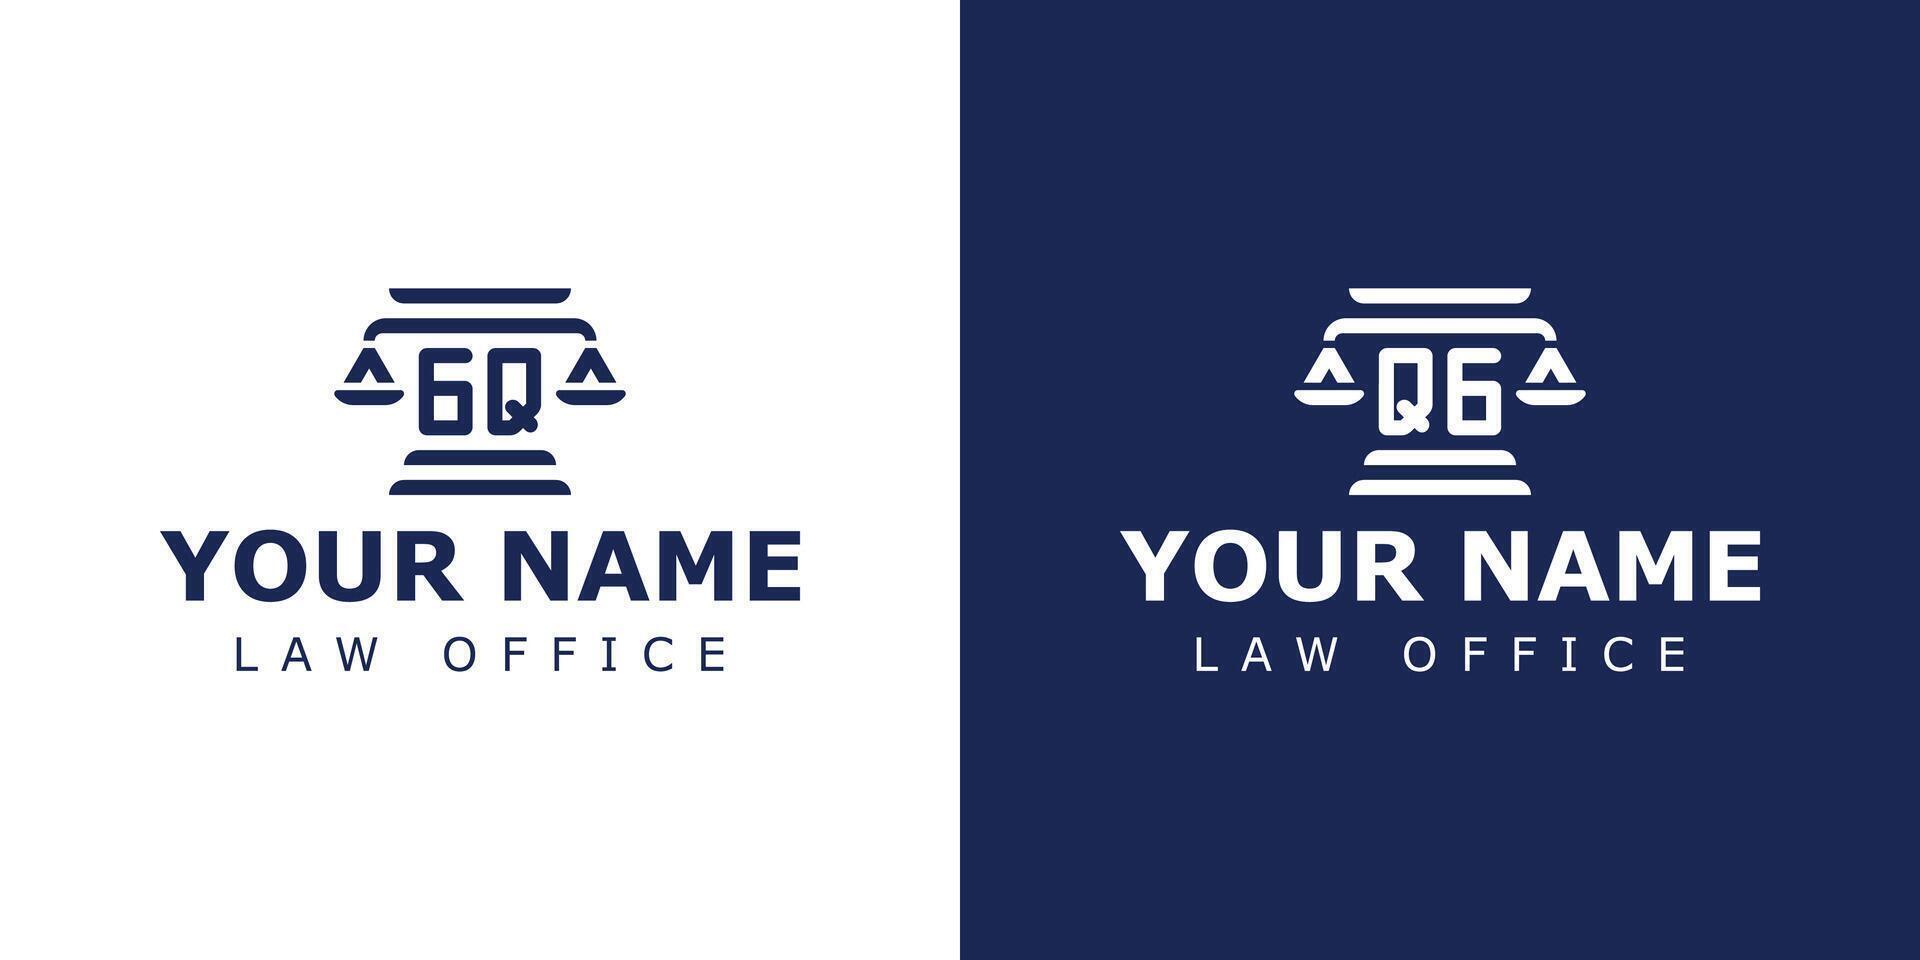 Letters GQ and QG Legal Logo, suitable for lawyer, legal, or justice with GQ or QG initials vector